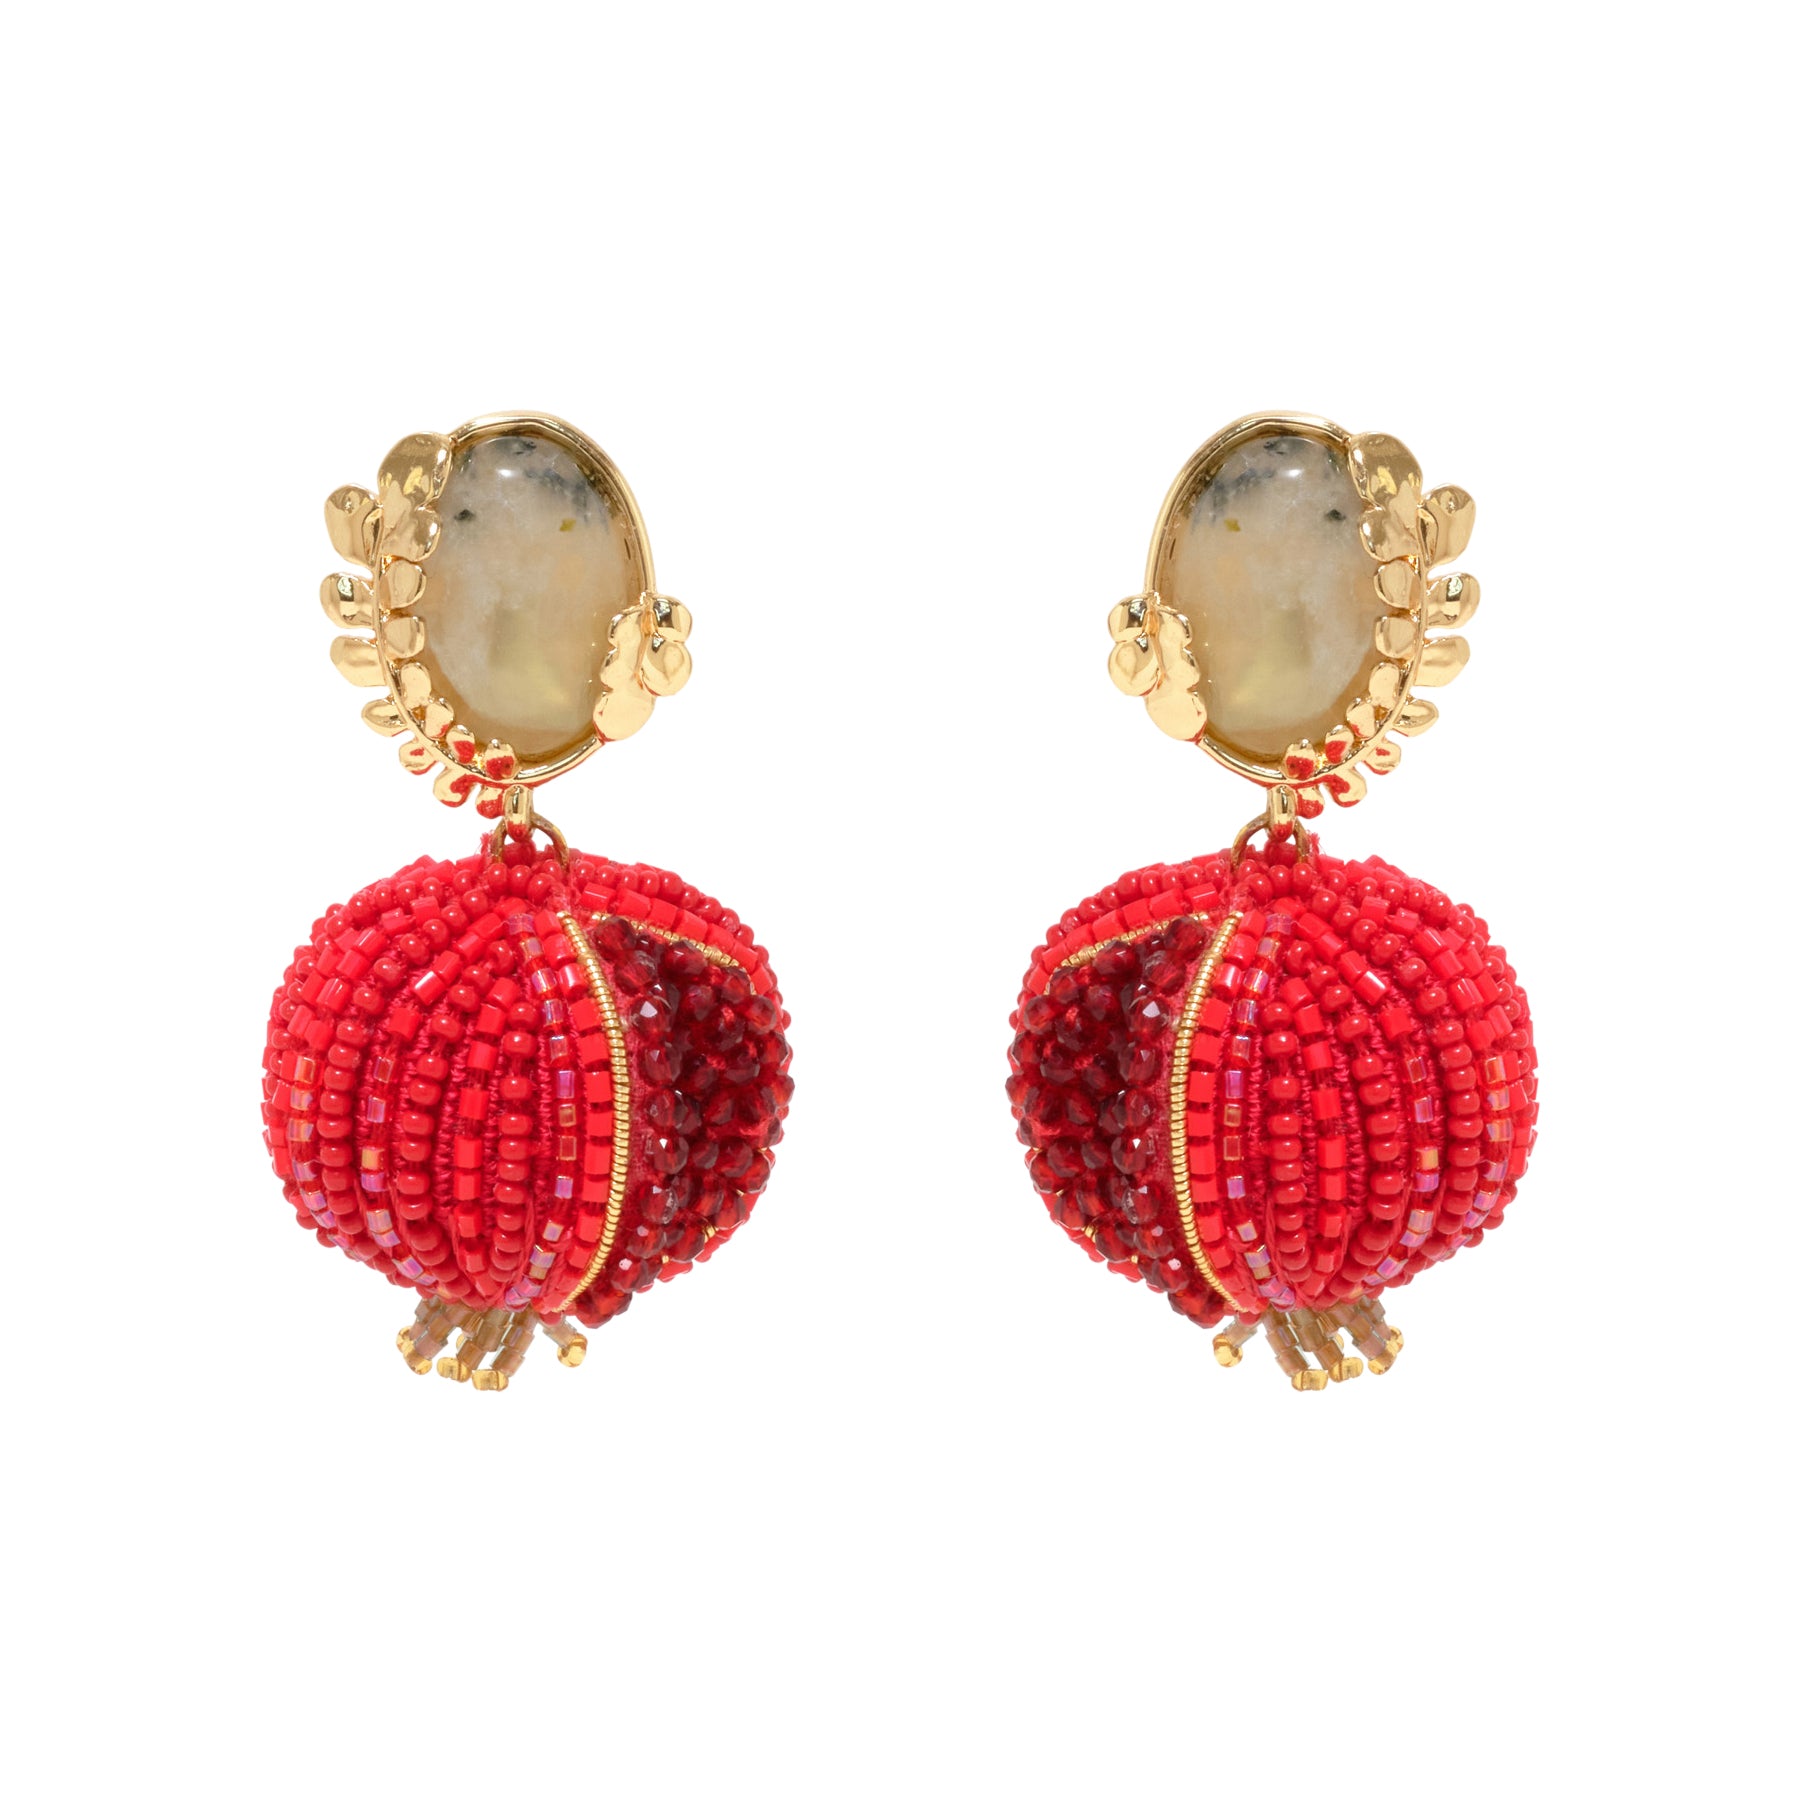 Red Beaded Double Drop Pomegranate Earrings with Stone and Gold on Flat White Background